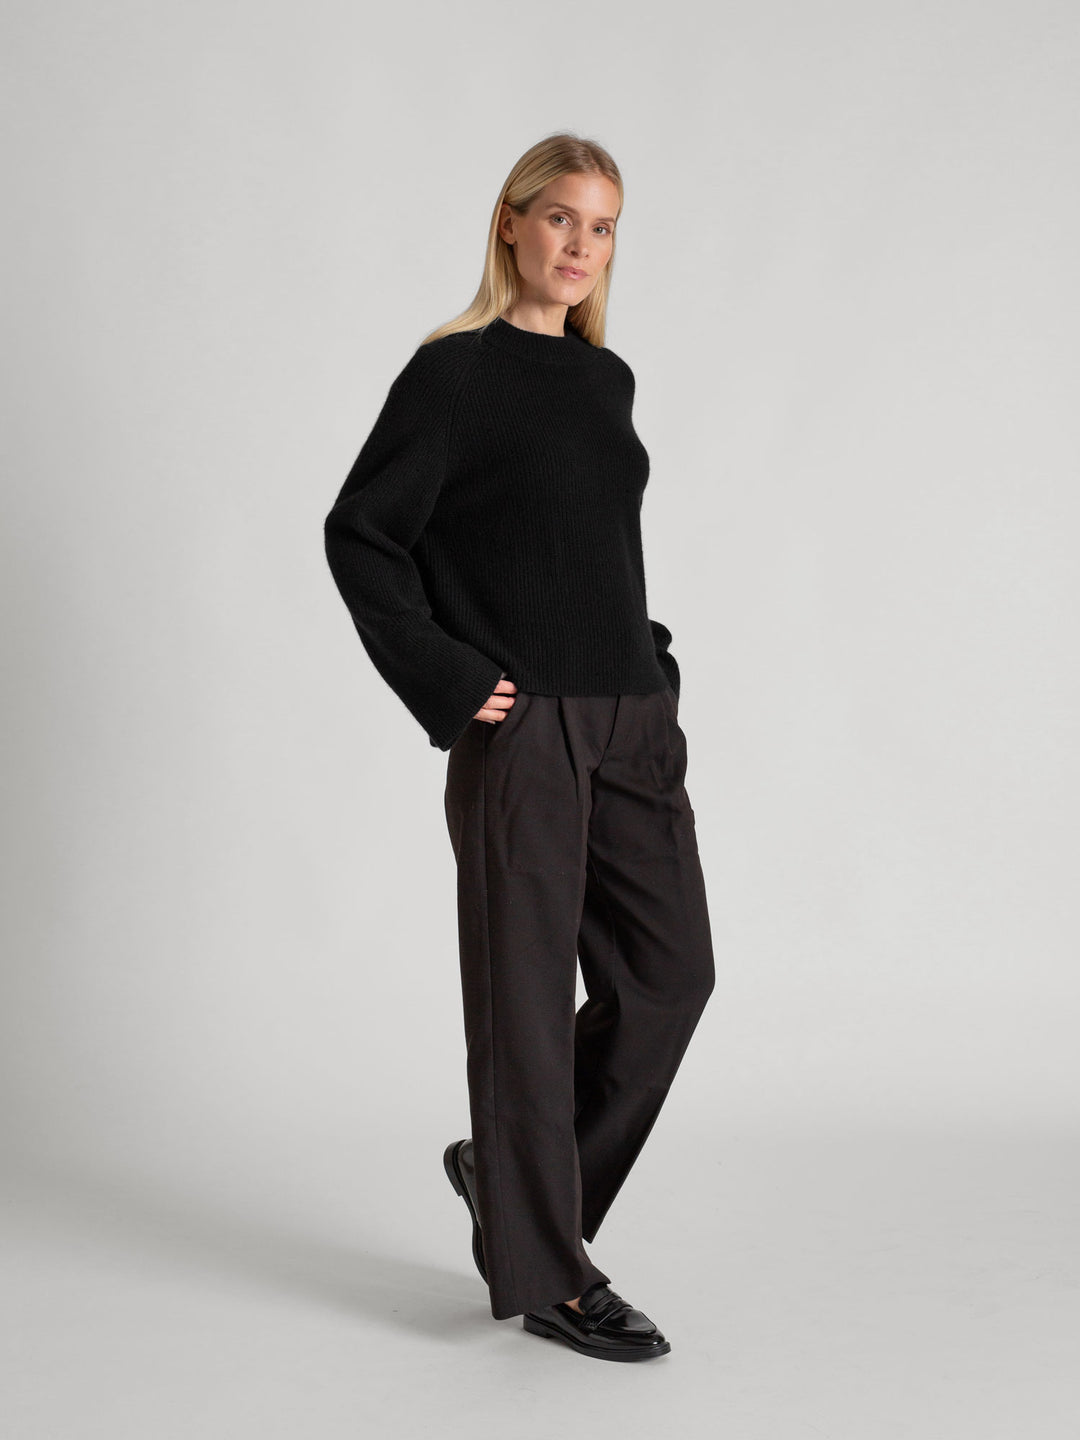 Rib knitted cashmere sweater "Idun" in 100% pure cashmere. Scandinavian design by Kashmina. Color: Black.